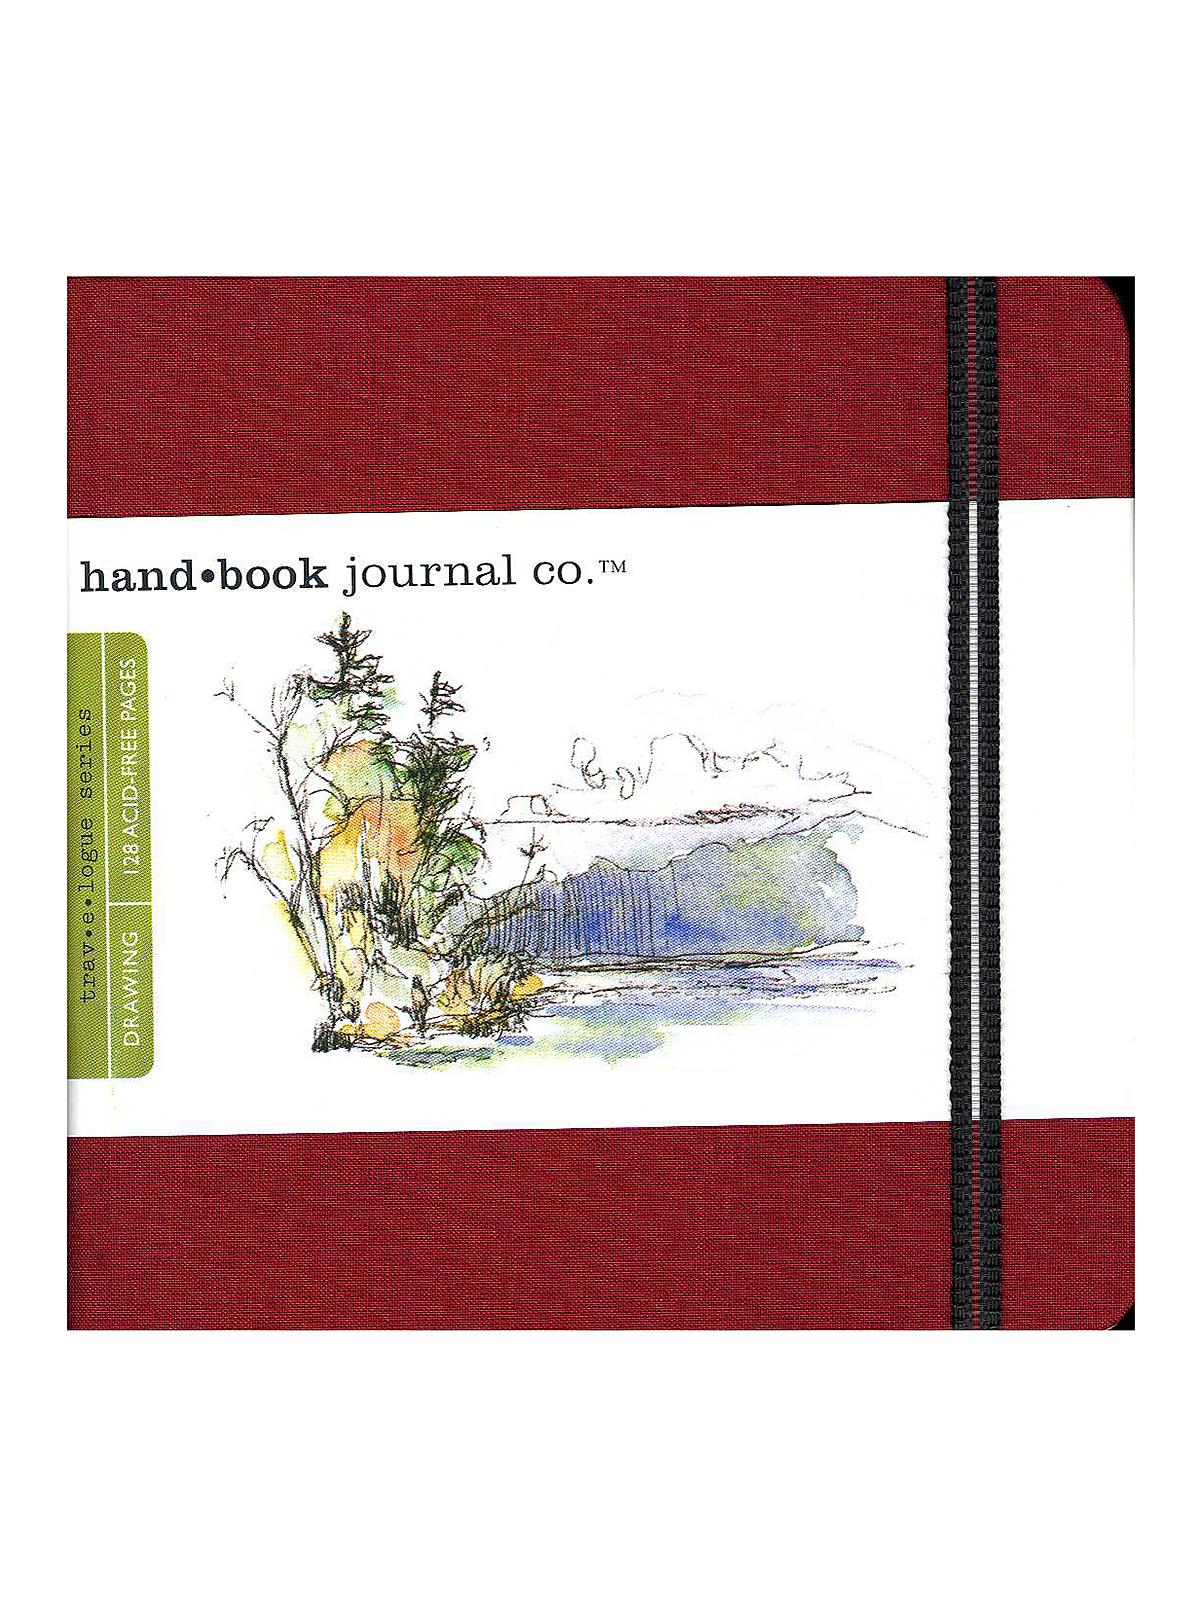 Travelogue Drawing Journals 5 1 2 In. X 5 1 2 In. Square Vermilion Red